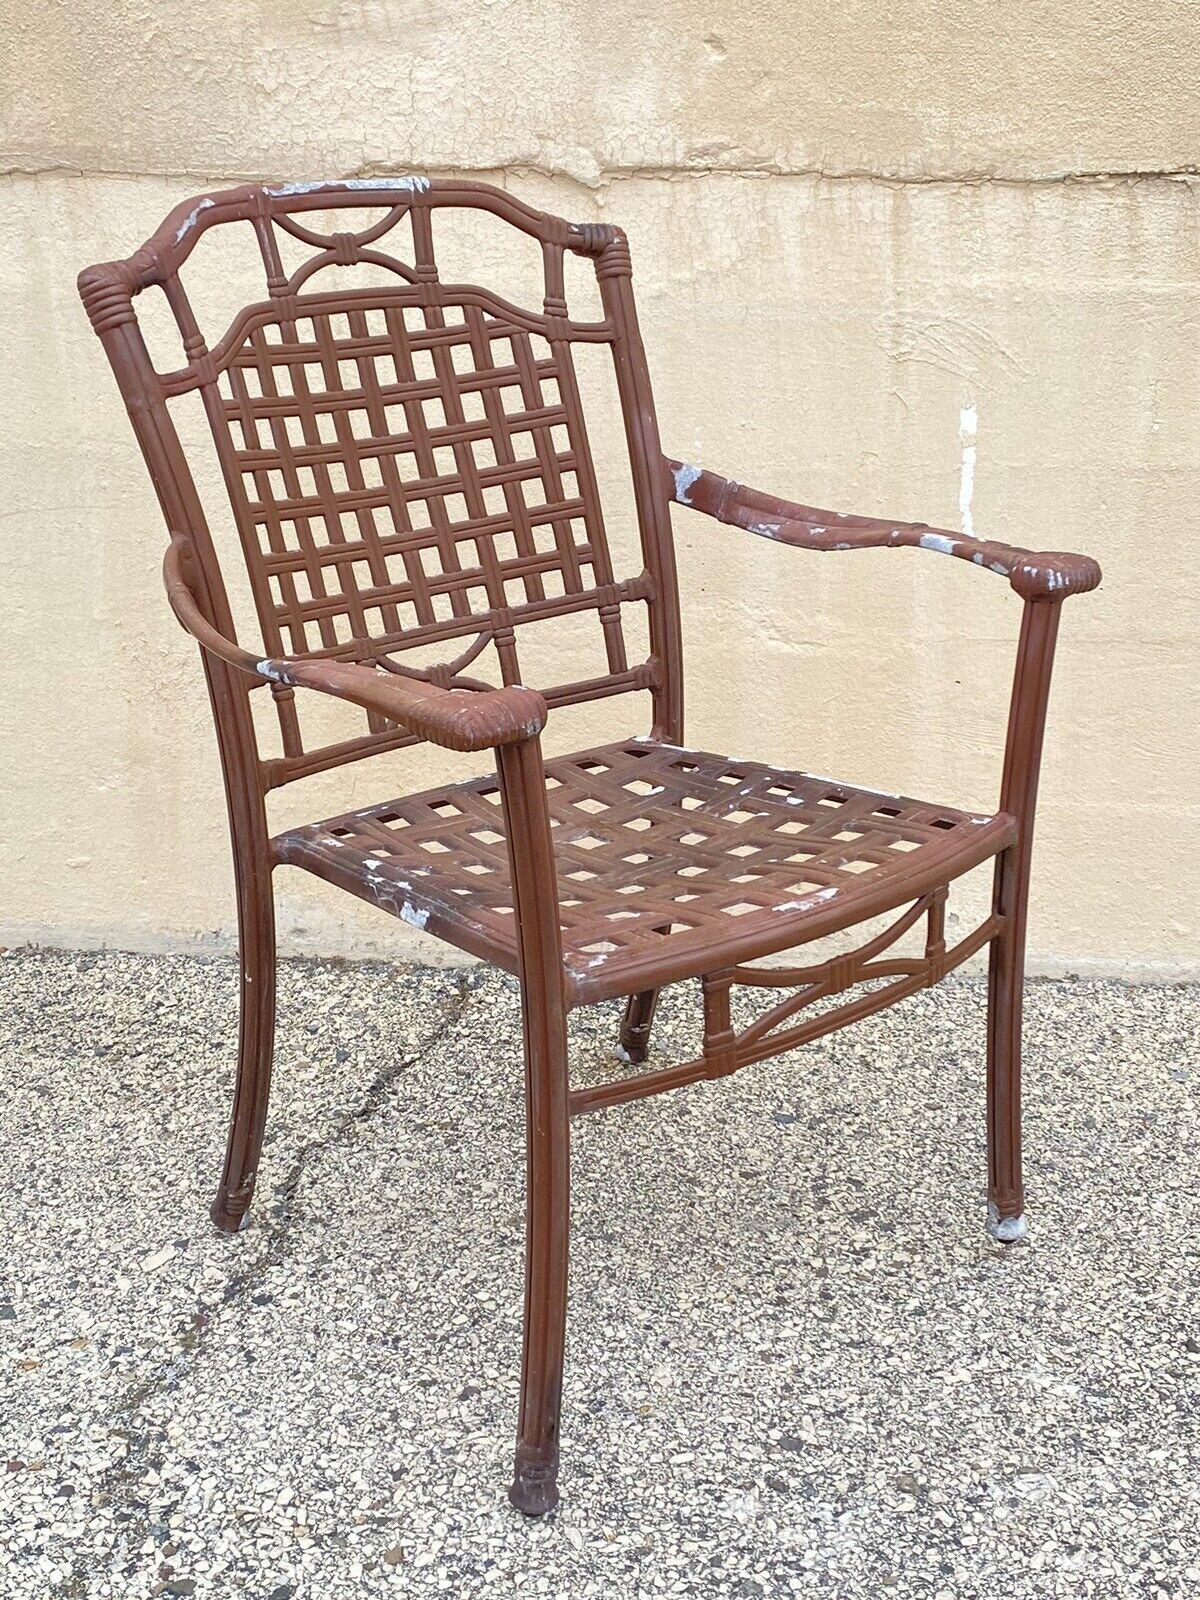 Cast Aluminum Basket Weave Lattice Rattan Patio Outdoor Chairs (B) - Set of 4 In Good Condition For Sale In Philadelphia, PA